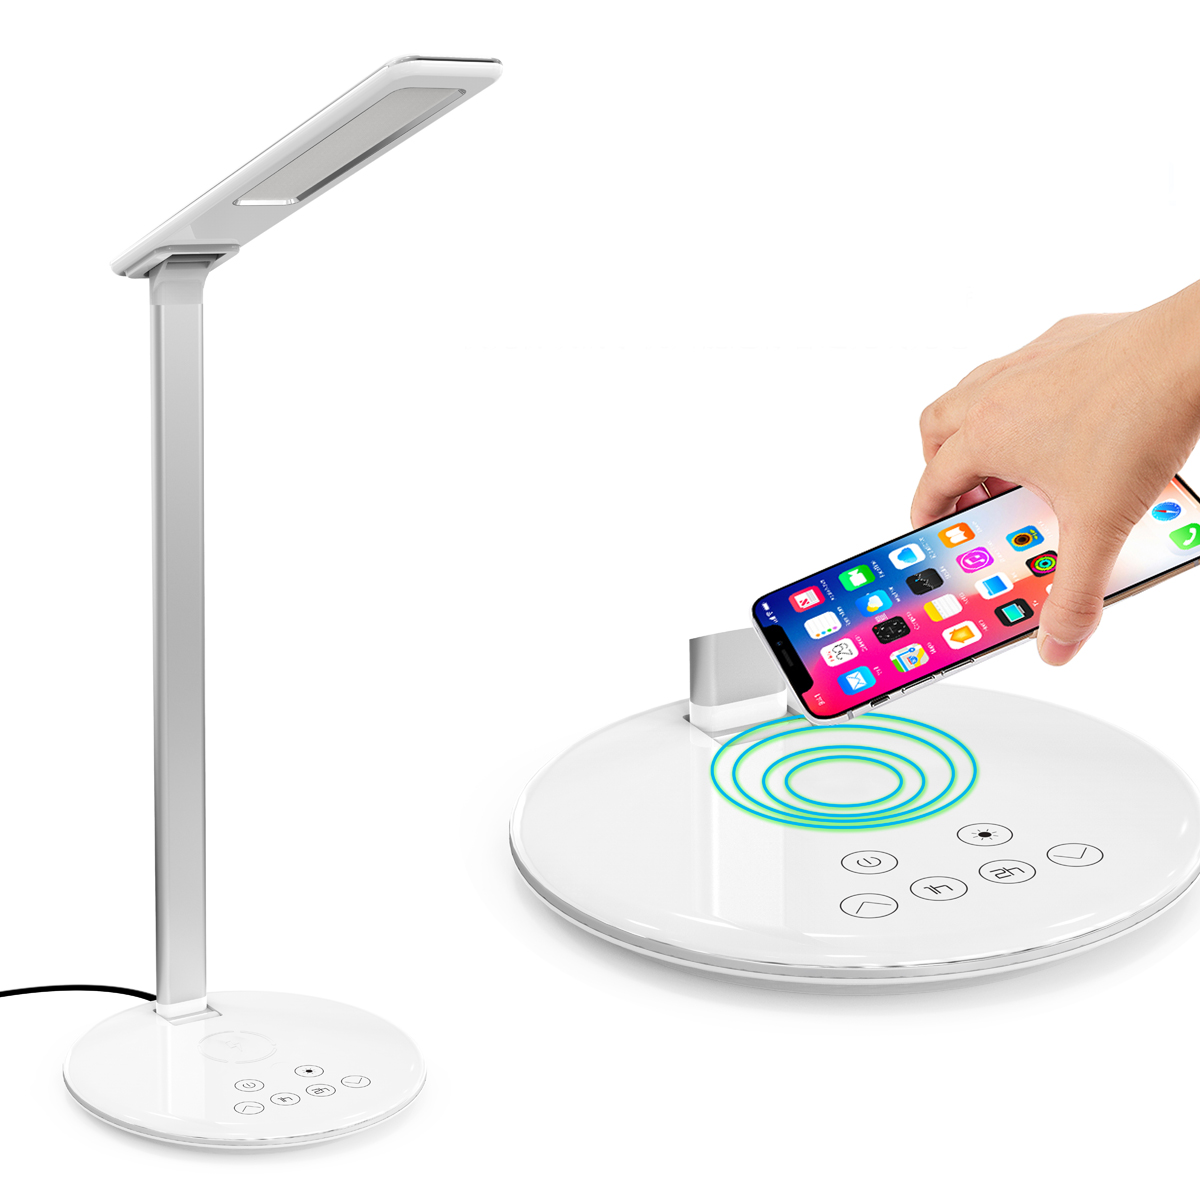 

10W Qi Wireless Charger LED Desk Lamp Phone Holder For iPhone XS Max XS 8 Plus Samsung Galaxy S10 Plus Huawei P30 Pro All Qi-enabled Devices